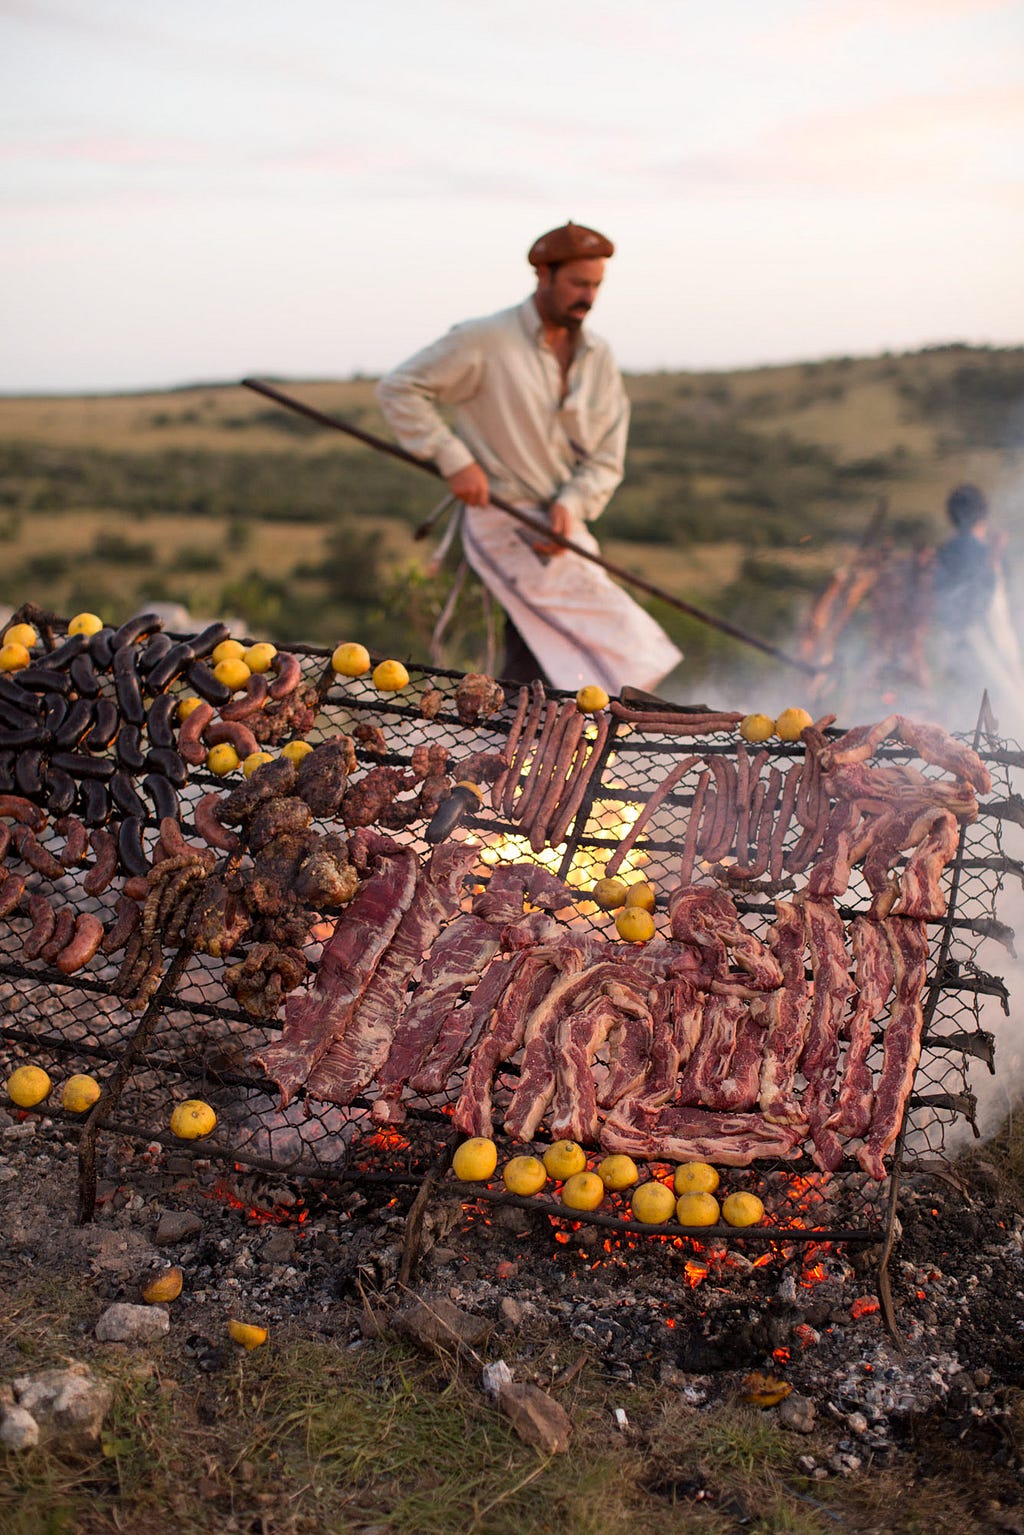 The typical gaucho diet consists of yerba maté and numerous cuts of meat, including blood sausage, chorizo, chitterlings, and asado de tira ribs. ©James Fisher 2017 All Rights Reserved